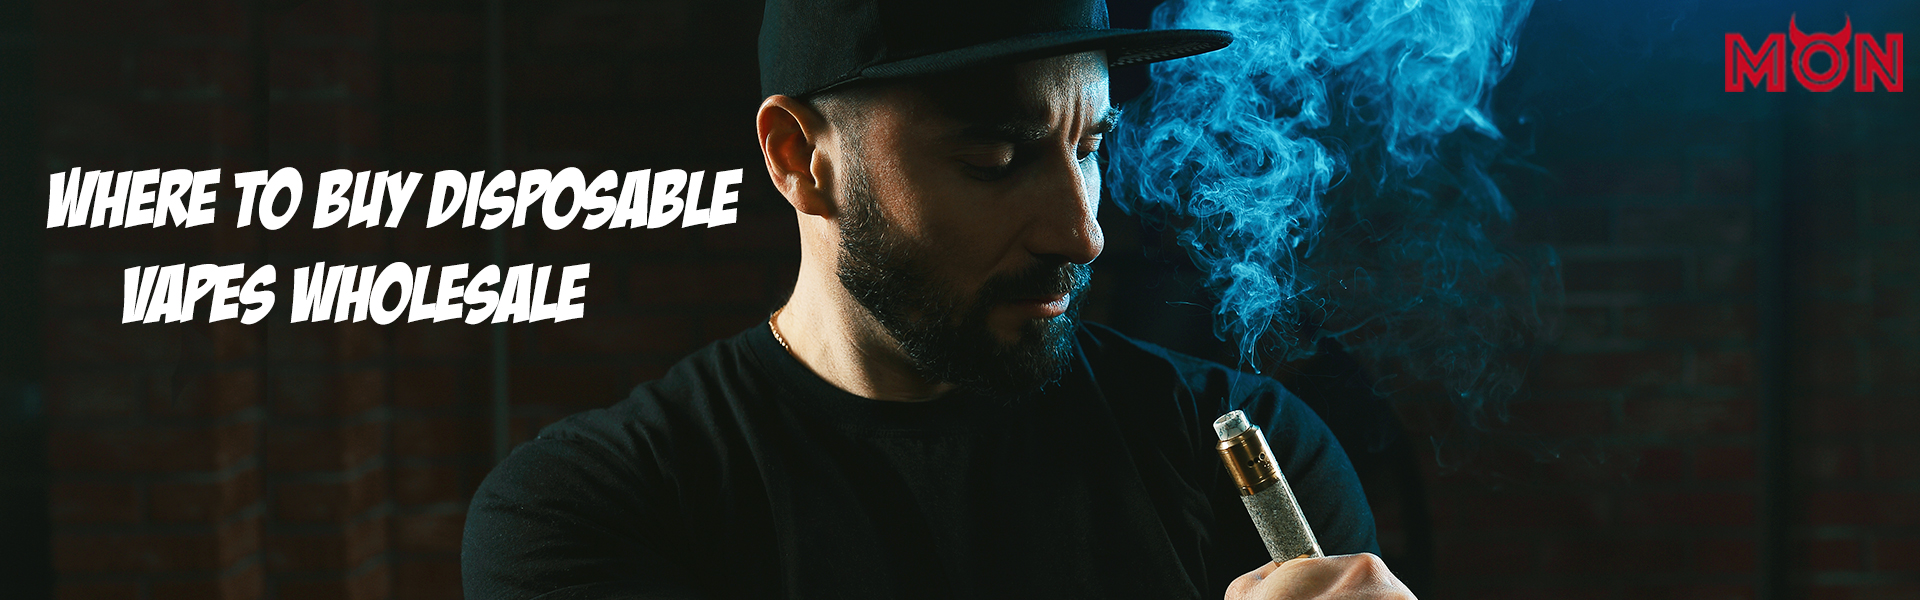 where to buy disposable vapes wholesale